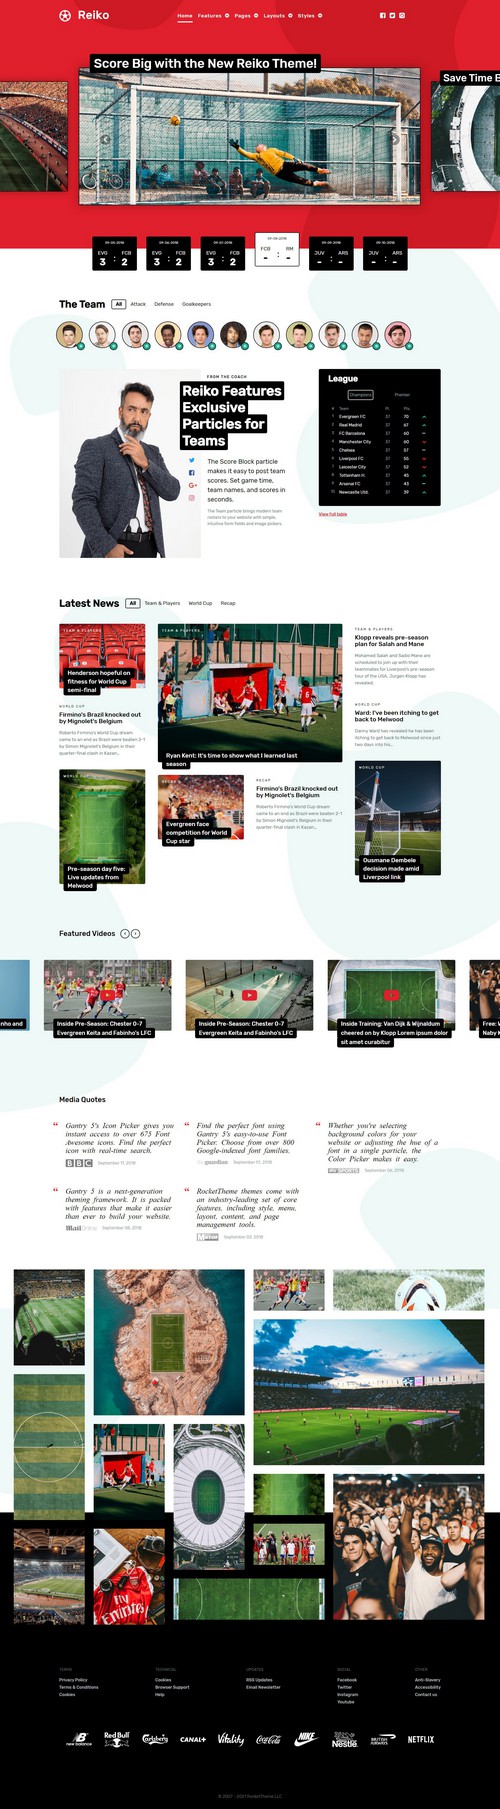 Reiko - Joomla 4 Template for Sports Clubs and Associations